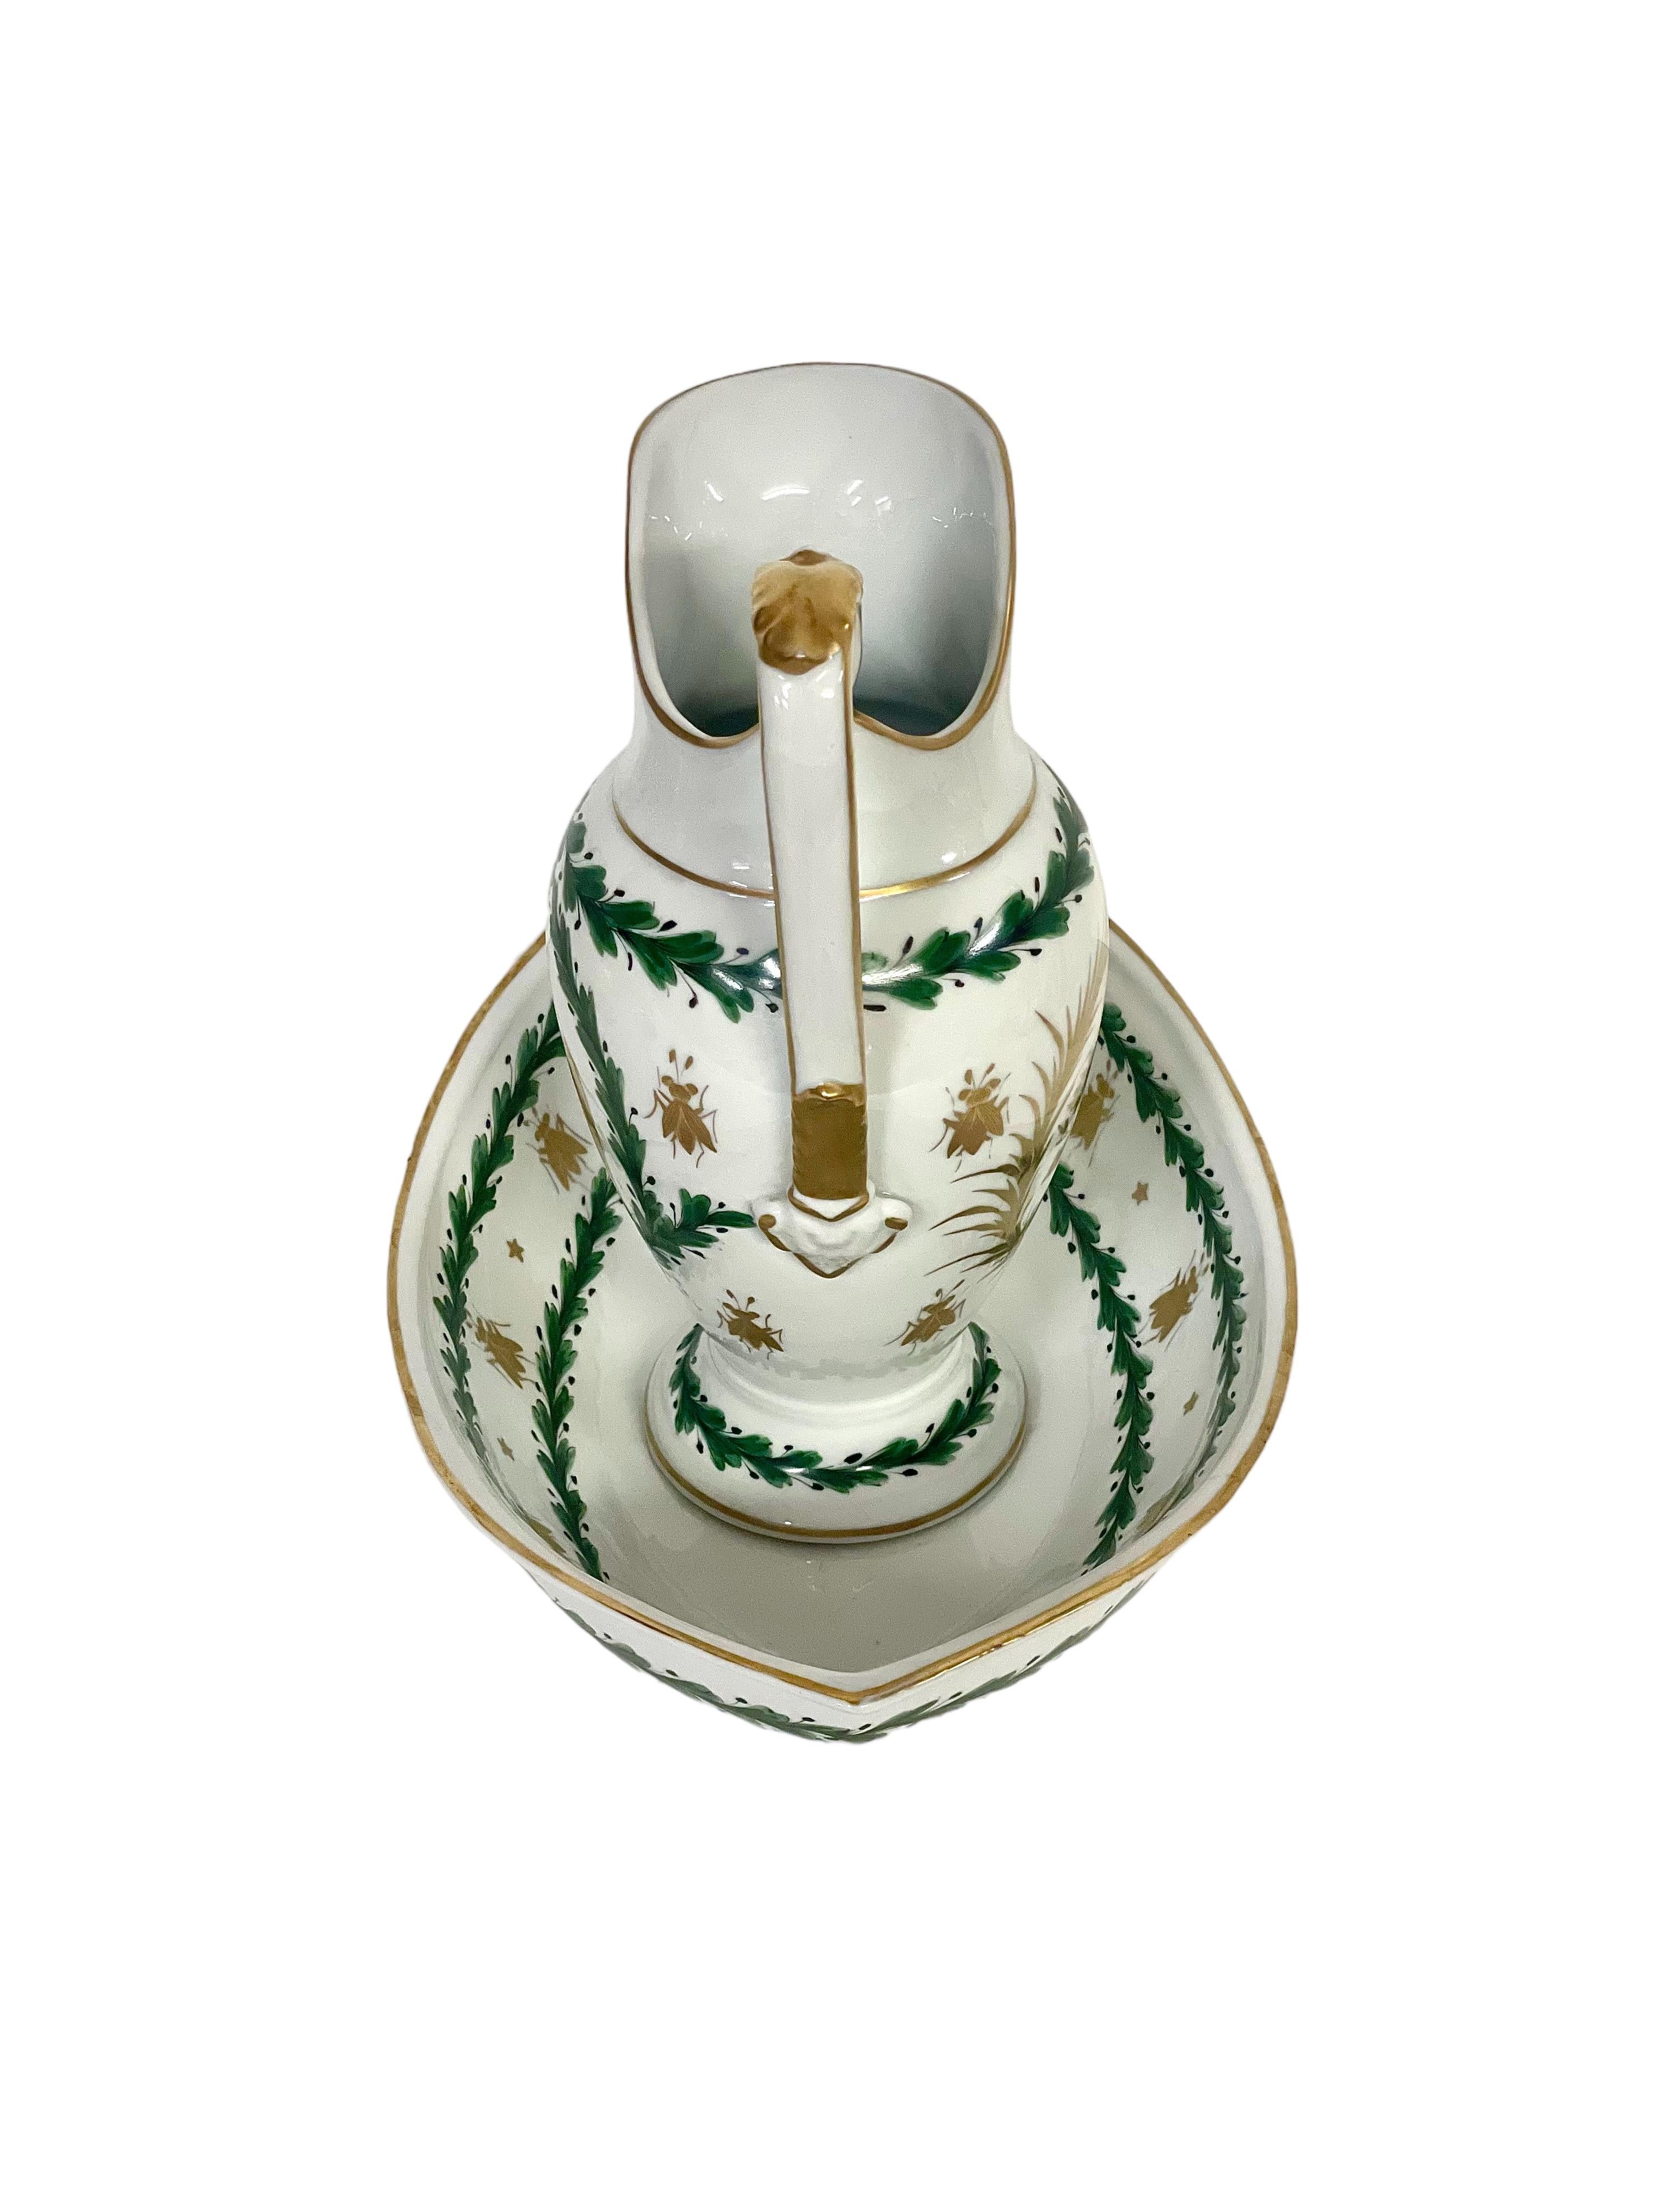 French Empire Period Paris Porcelain Basin and Pitcher with Napoleonic Emblems For Sale 12